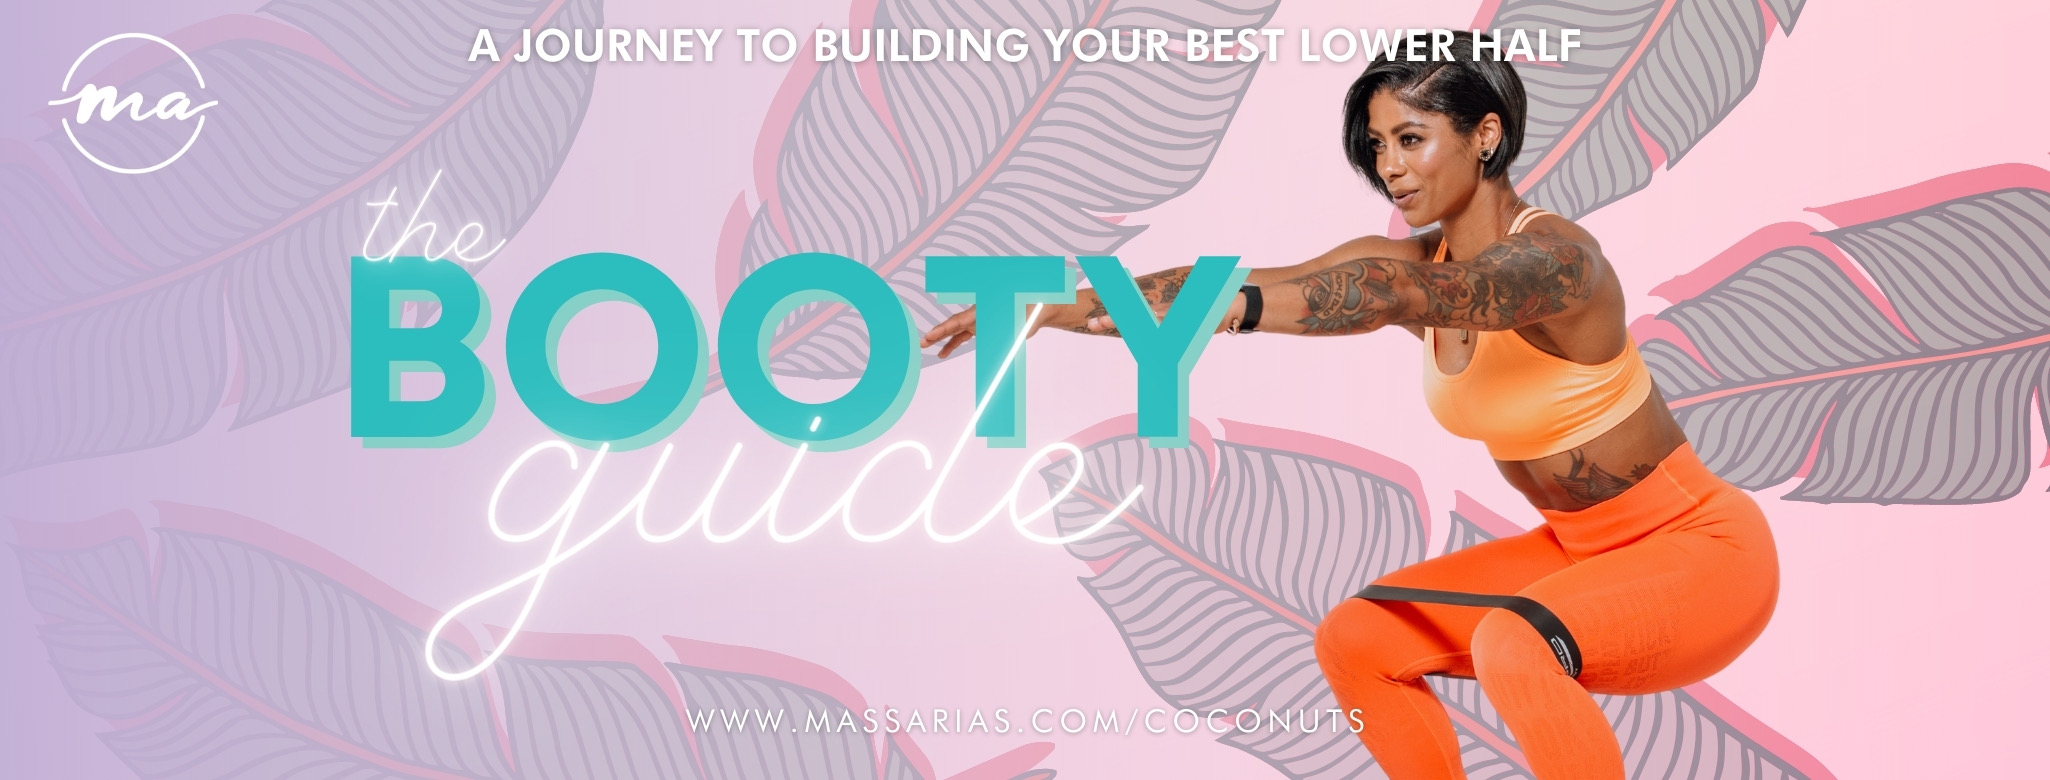 Booty Guide Best Lower Half Promo Cover Massy Arias 9068